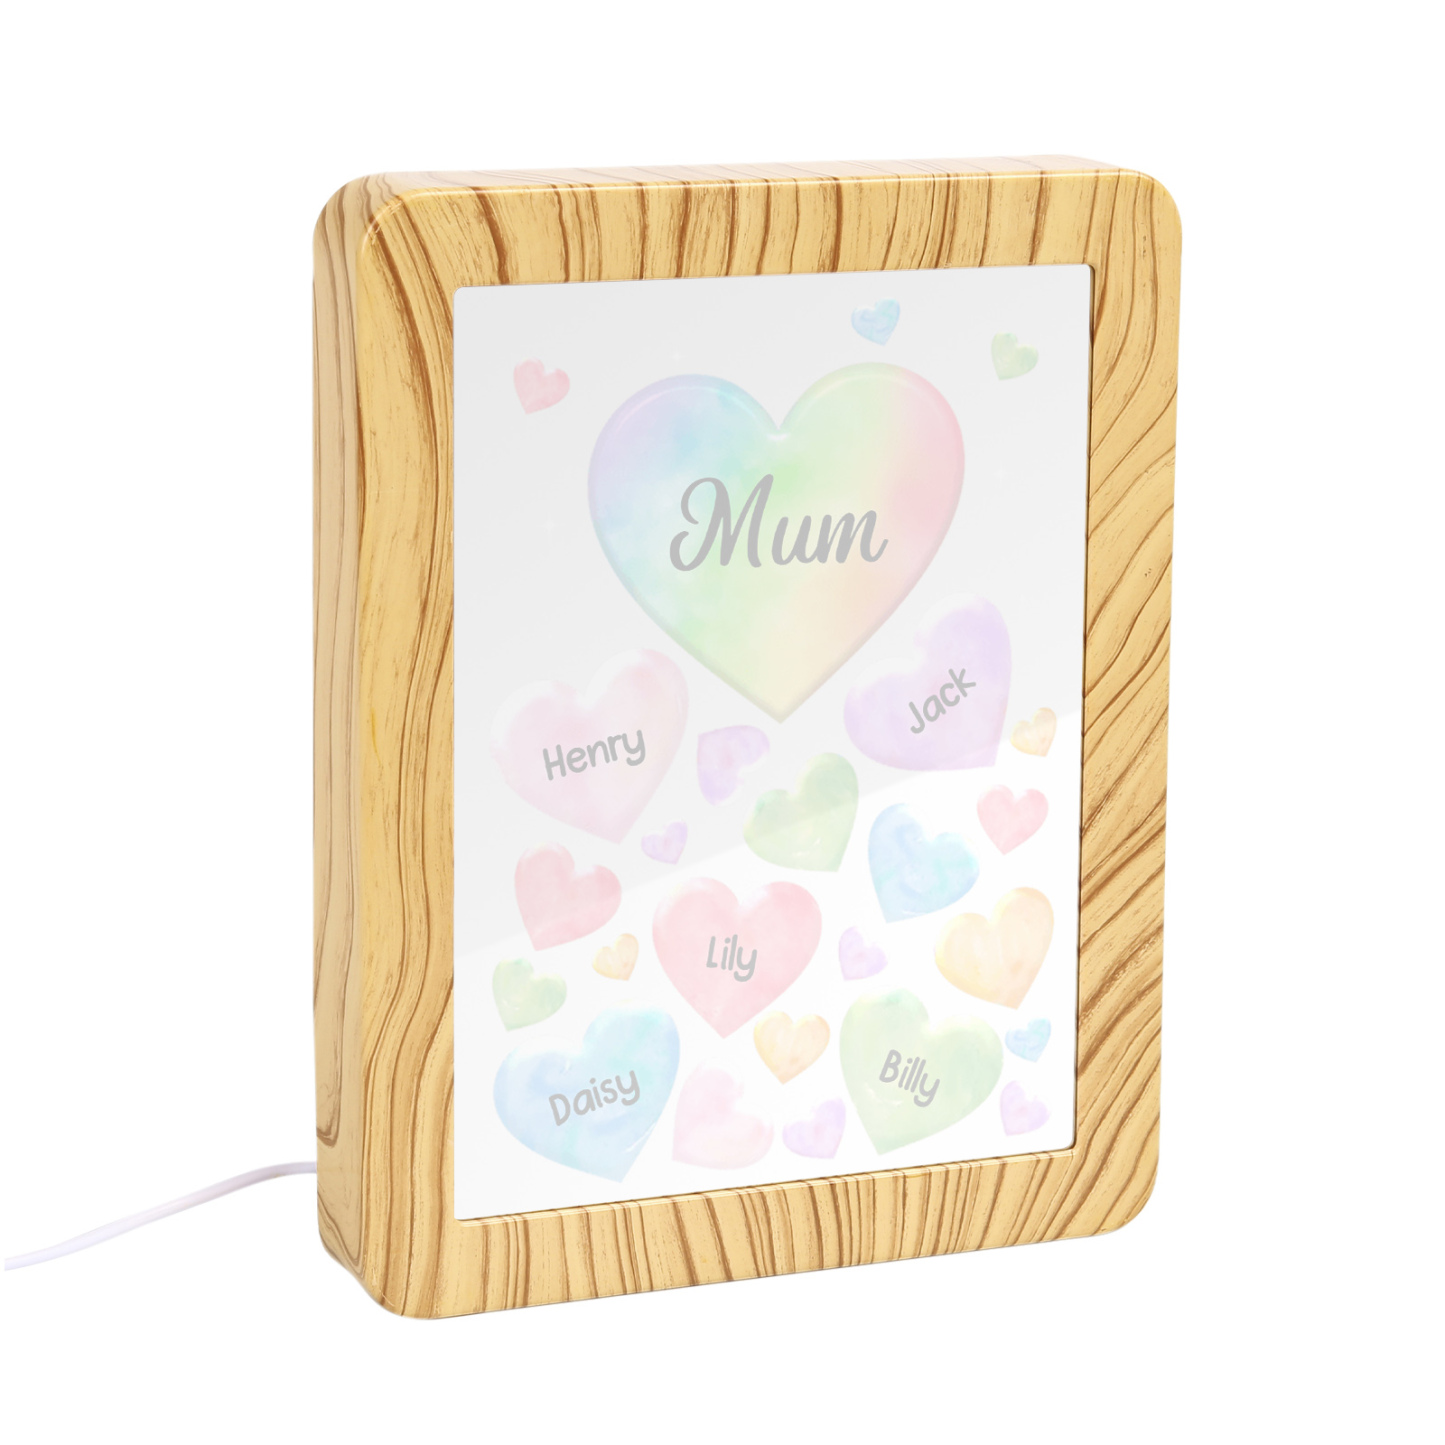 5 Names - Personalized Mom Home Wood Color Plug-in Mirror Photo Frame Custom Text LED Night Light Gift for Mom